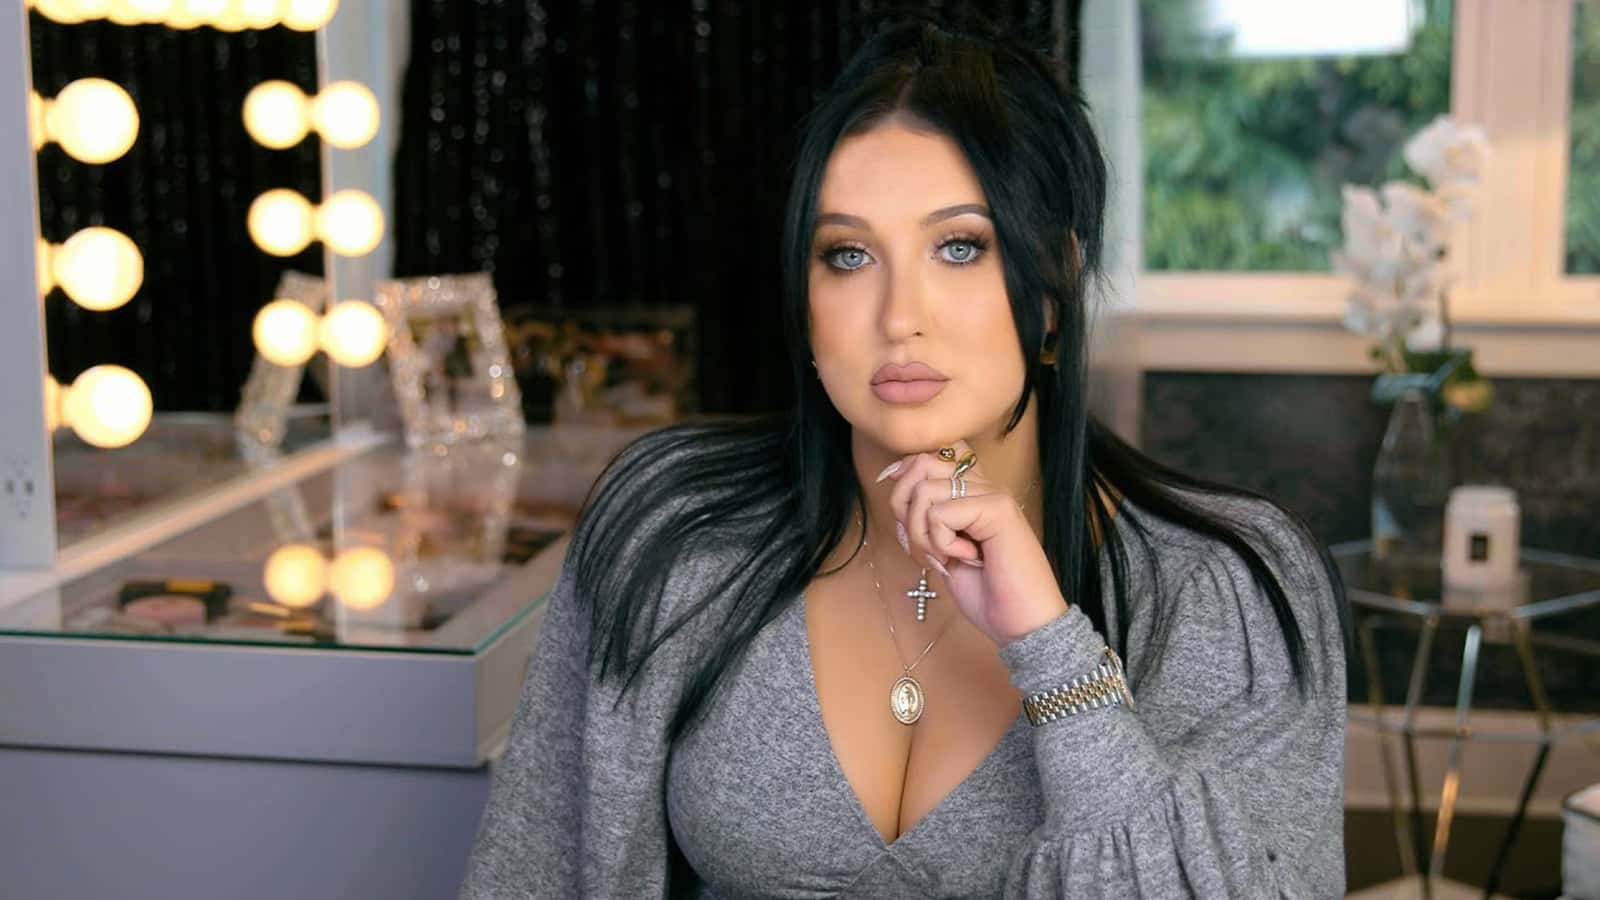 Jaclyn Hill begs Instagram trolls to stop 'awful' comments: “I'm only  human” - Dexerto